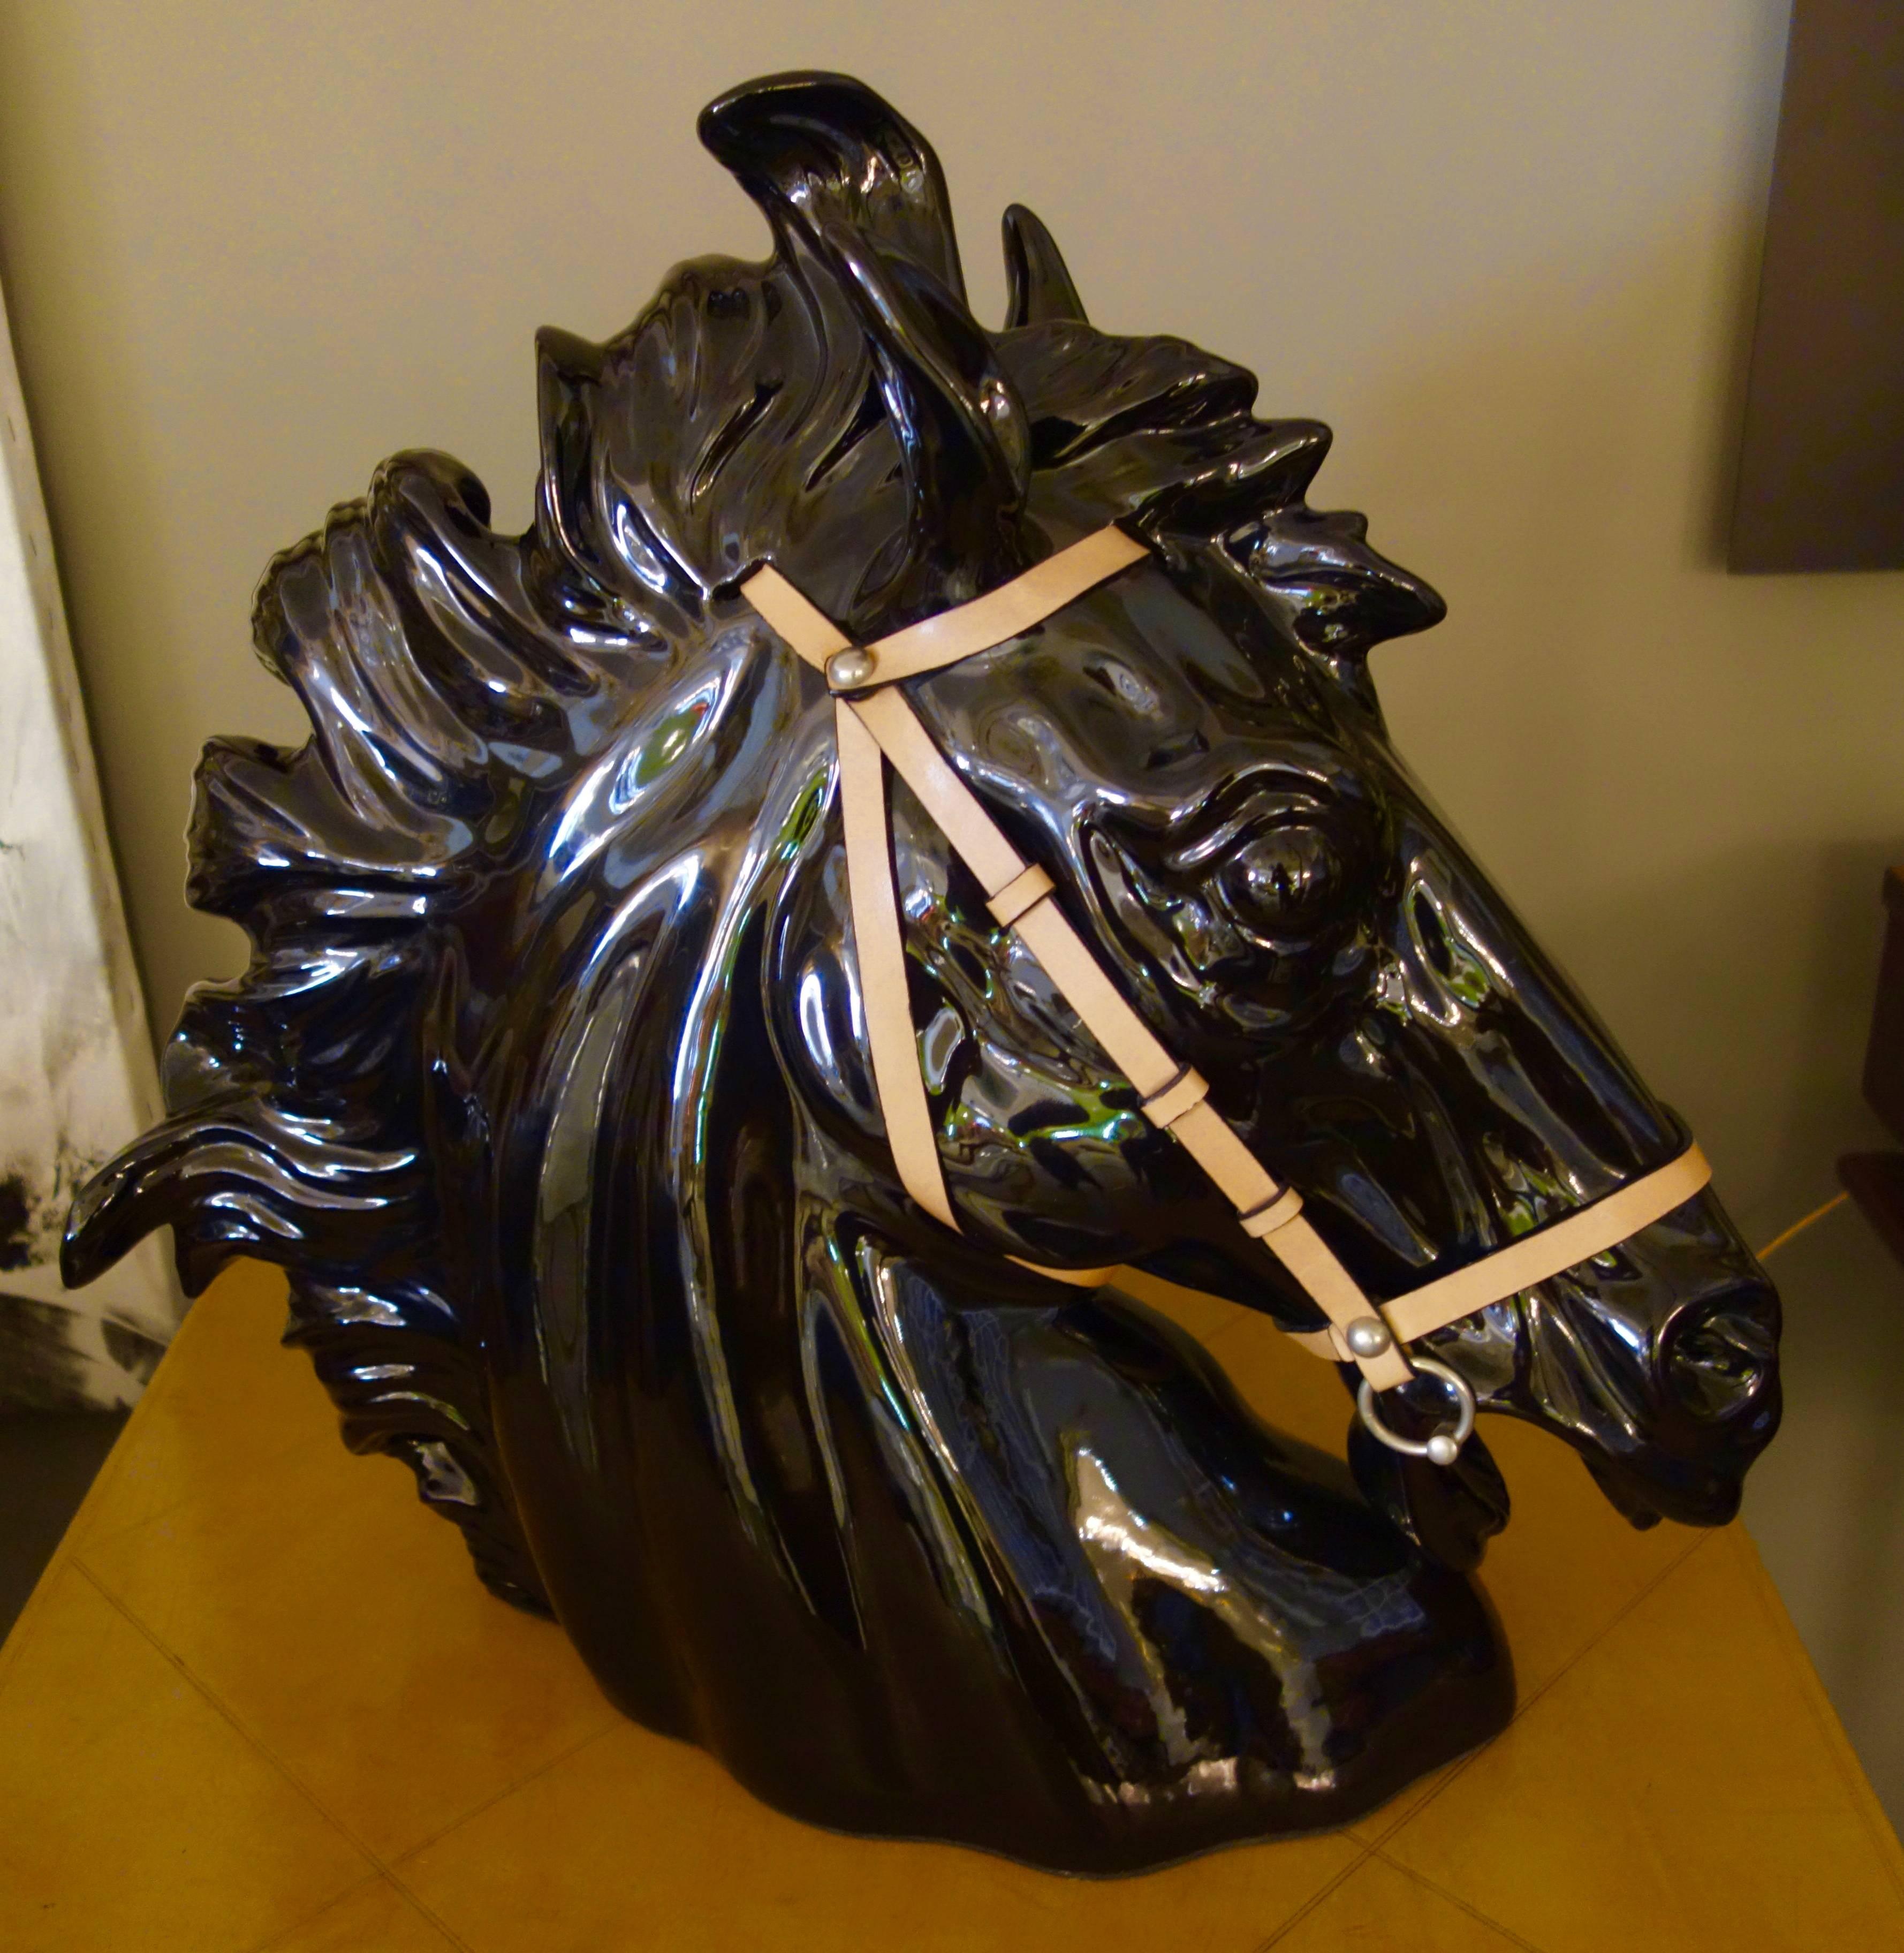 A large dimensional and well-articulated black ceramic horse head sculpture by Gucci with leather bridal and Gucci label affixed to bottom.